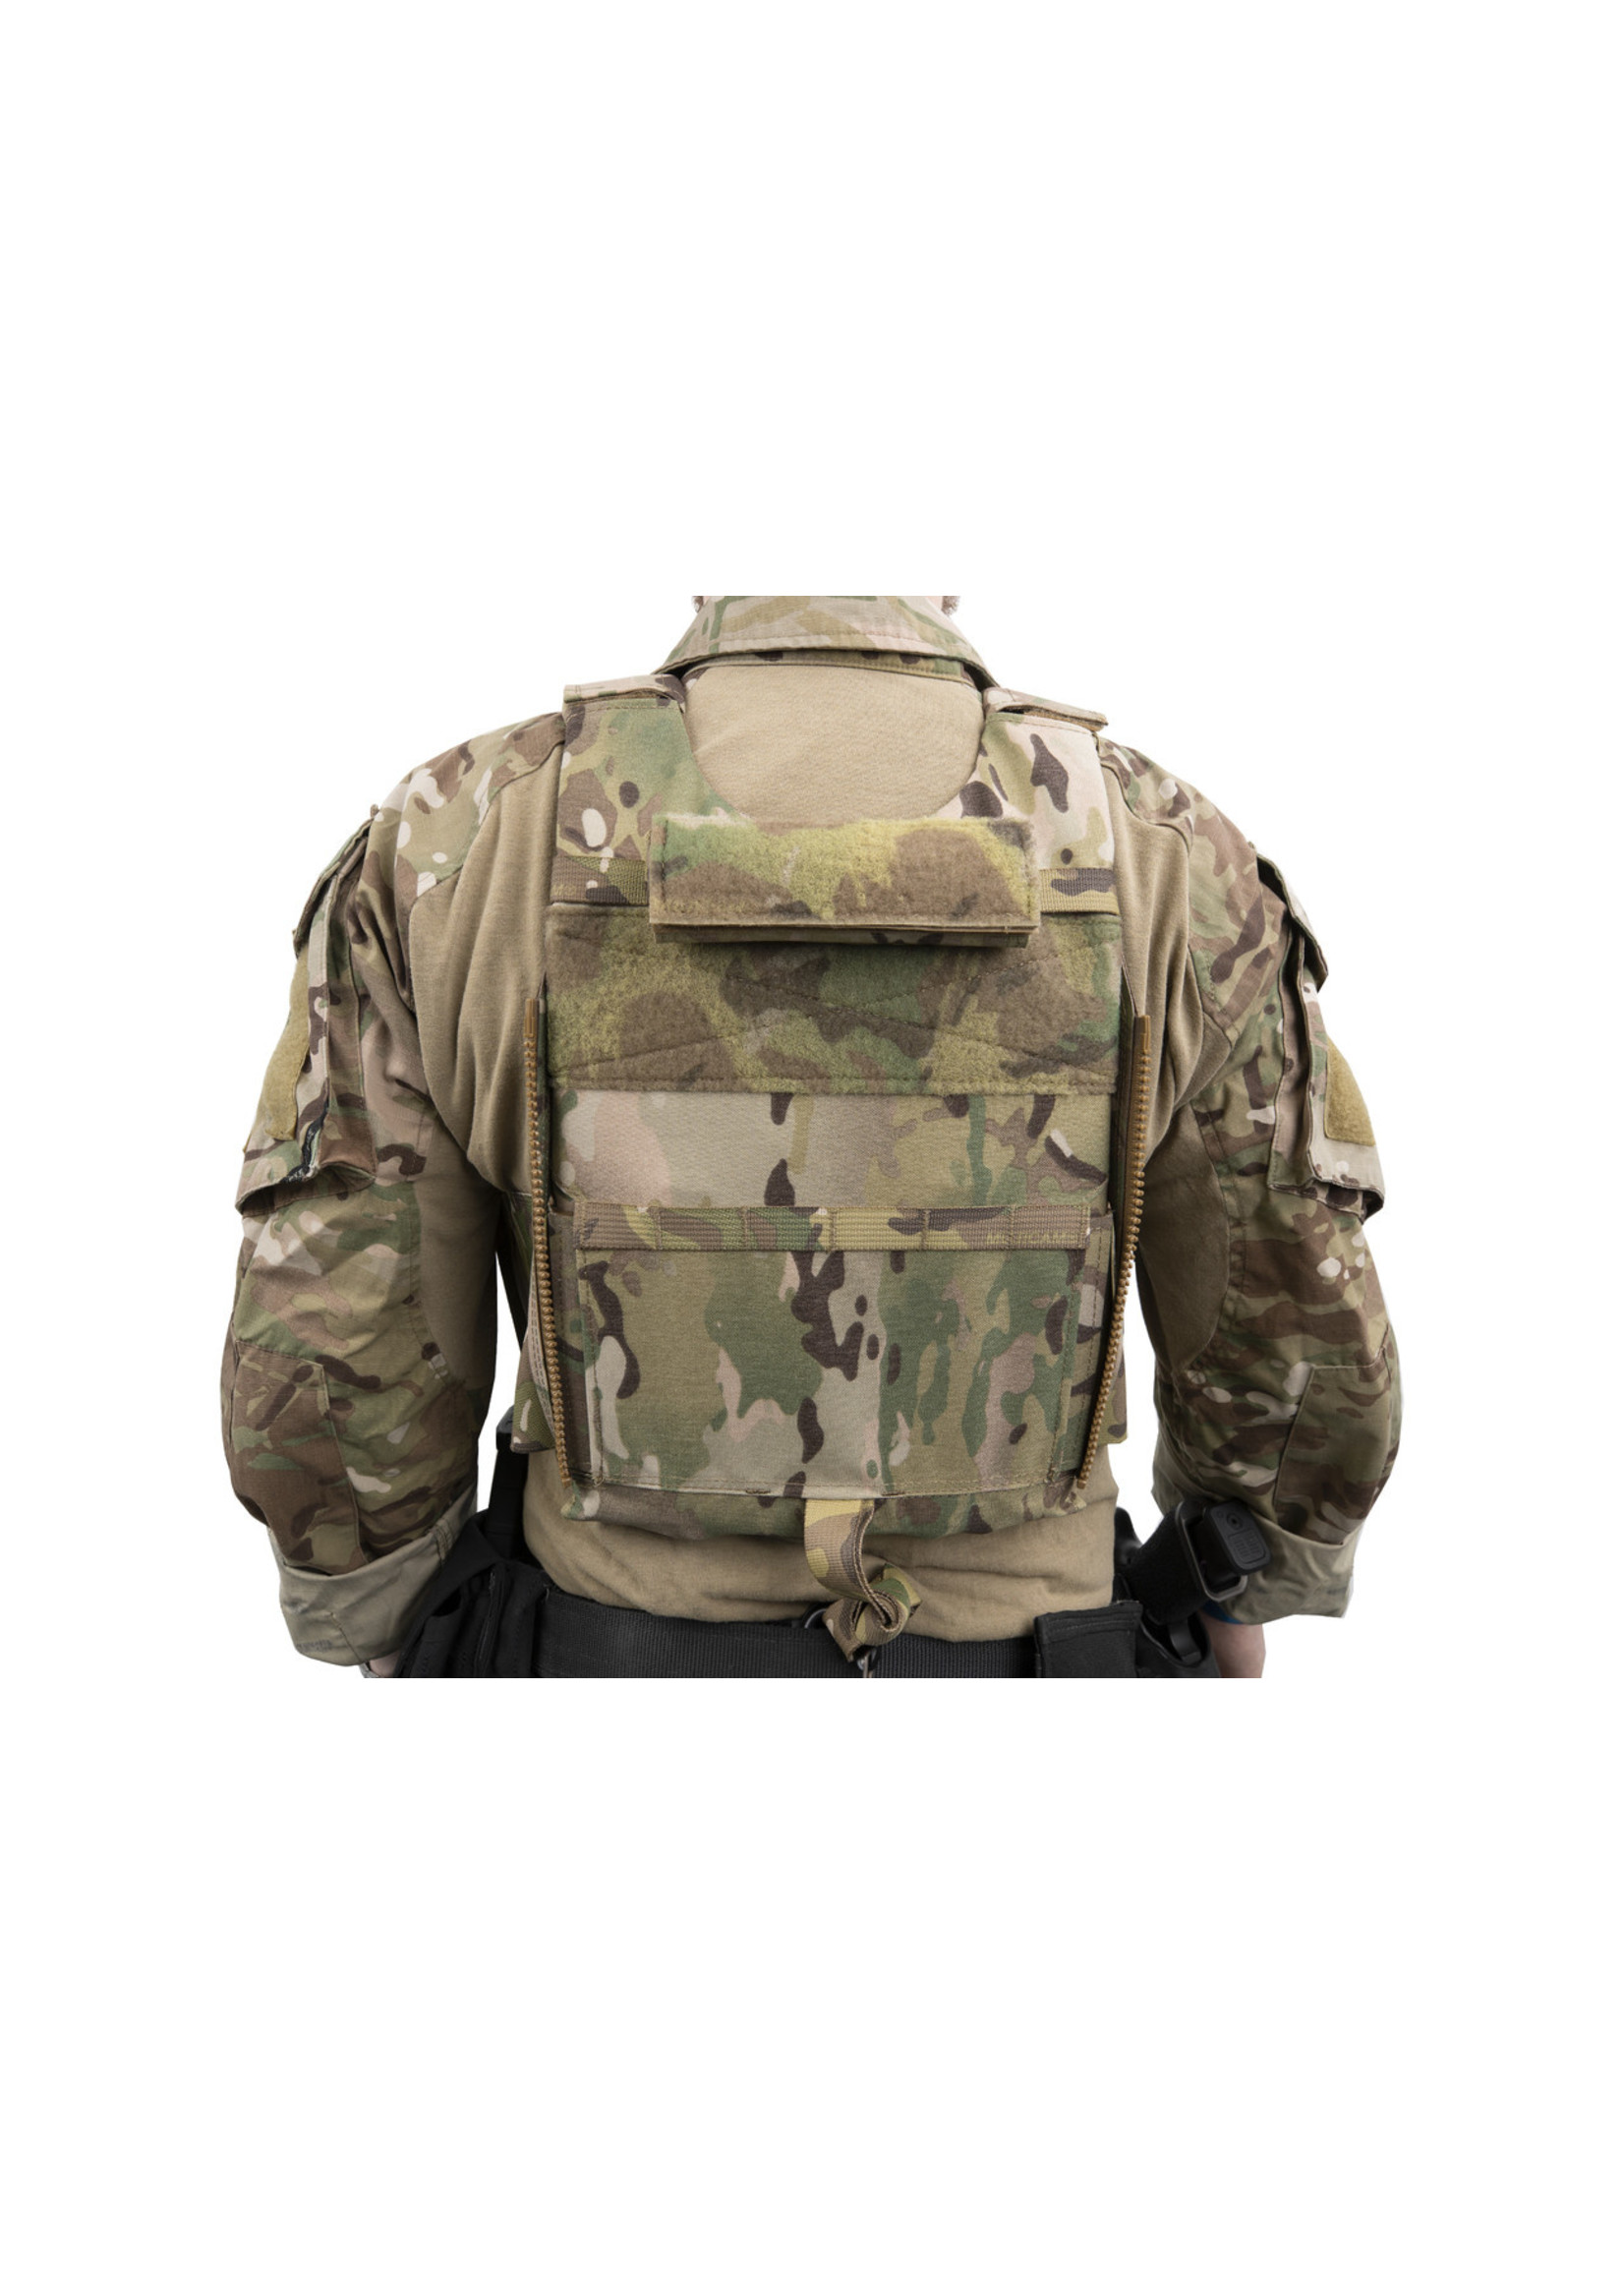 Spiritus Systems LV119 COVERT Plate Carrier Crye Precision